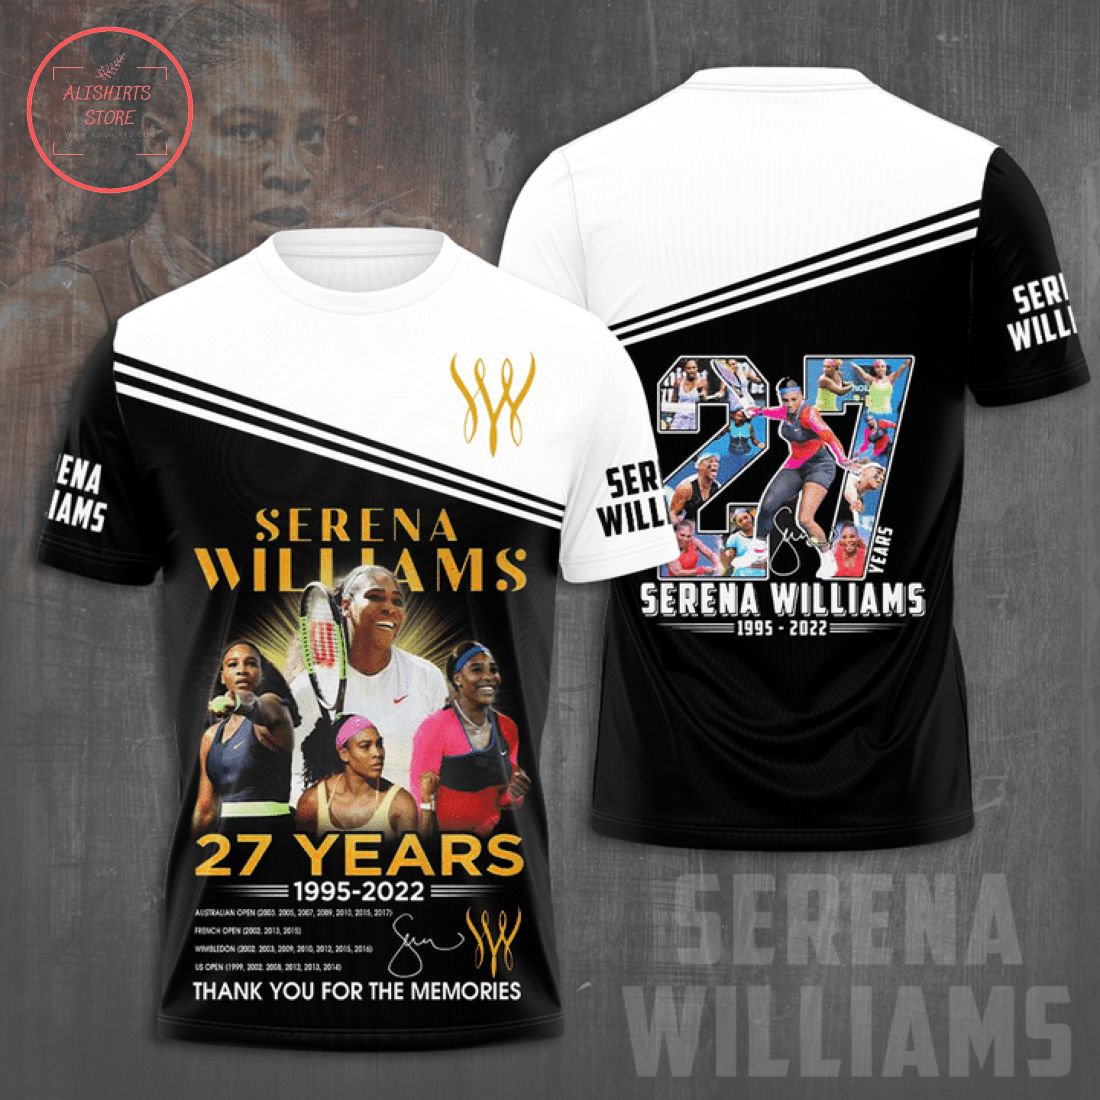 Serena Williams 27 years 1995 2022 Thank You for the Memories Shirt